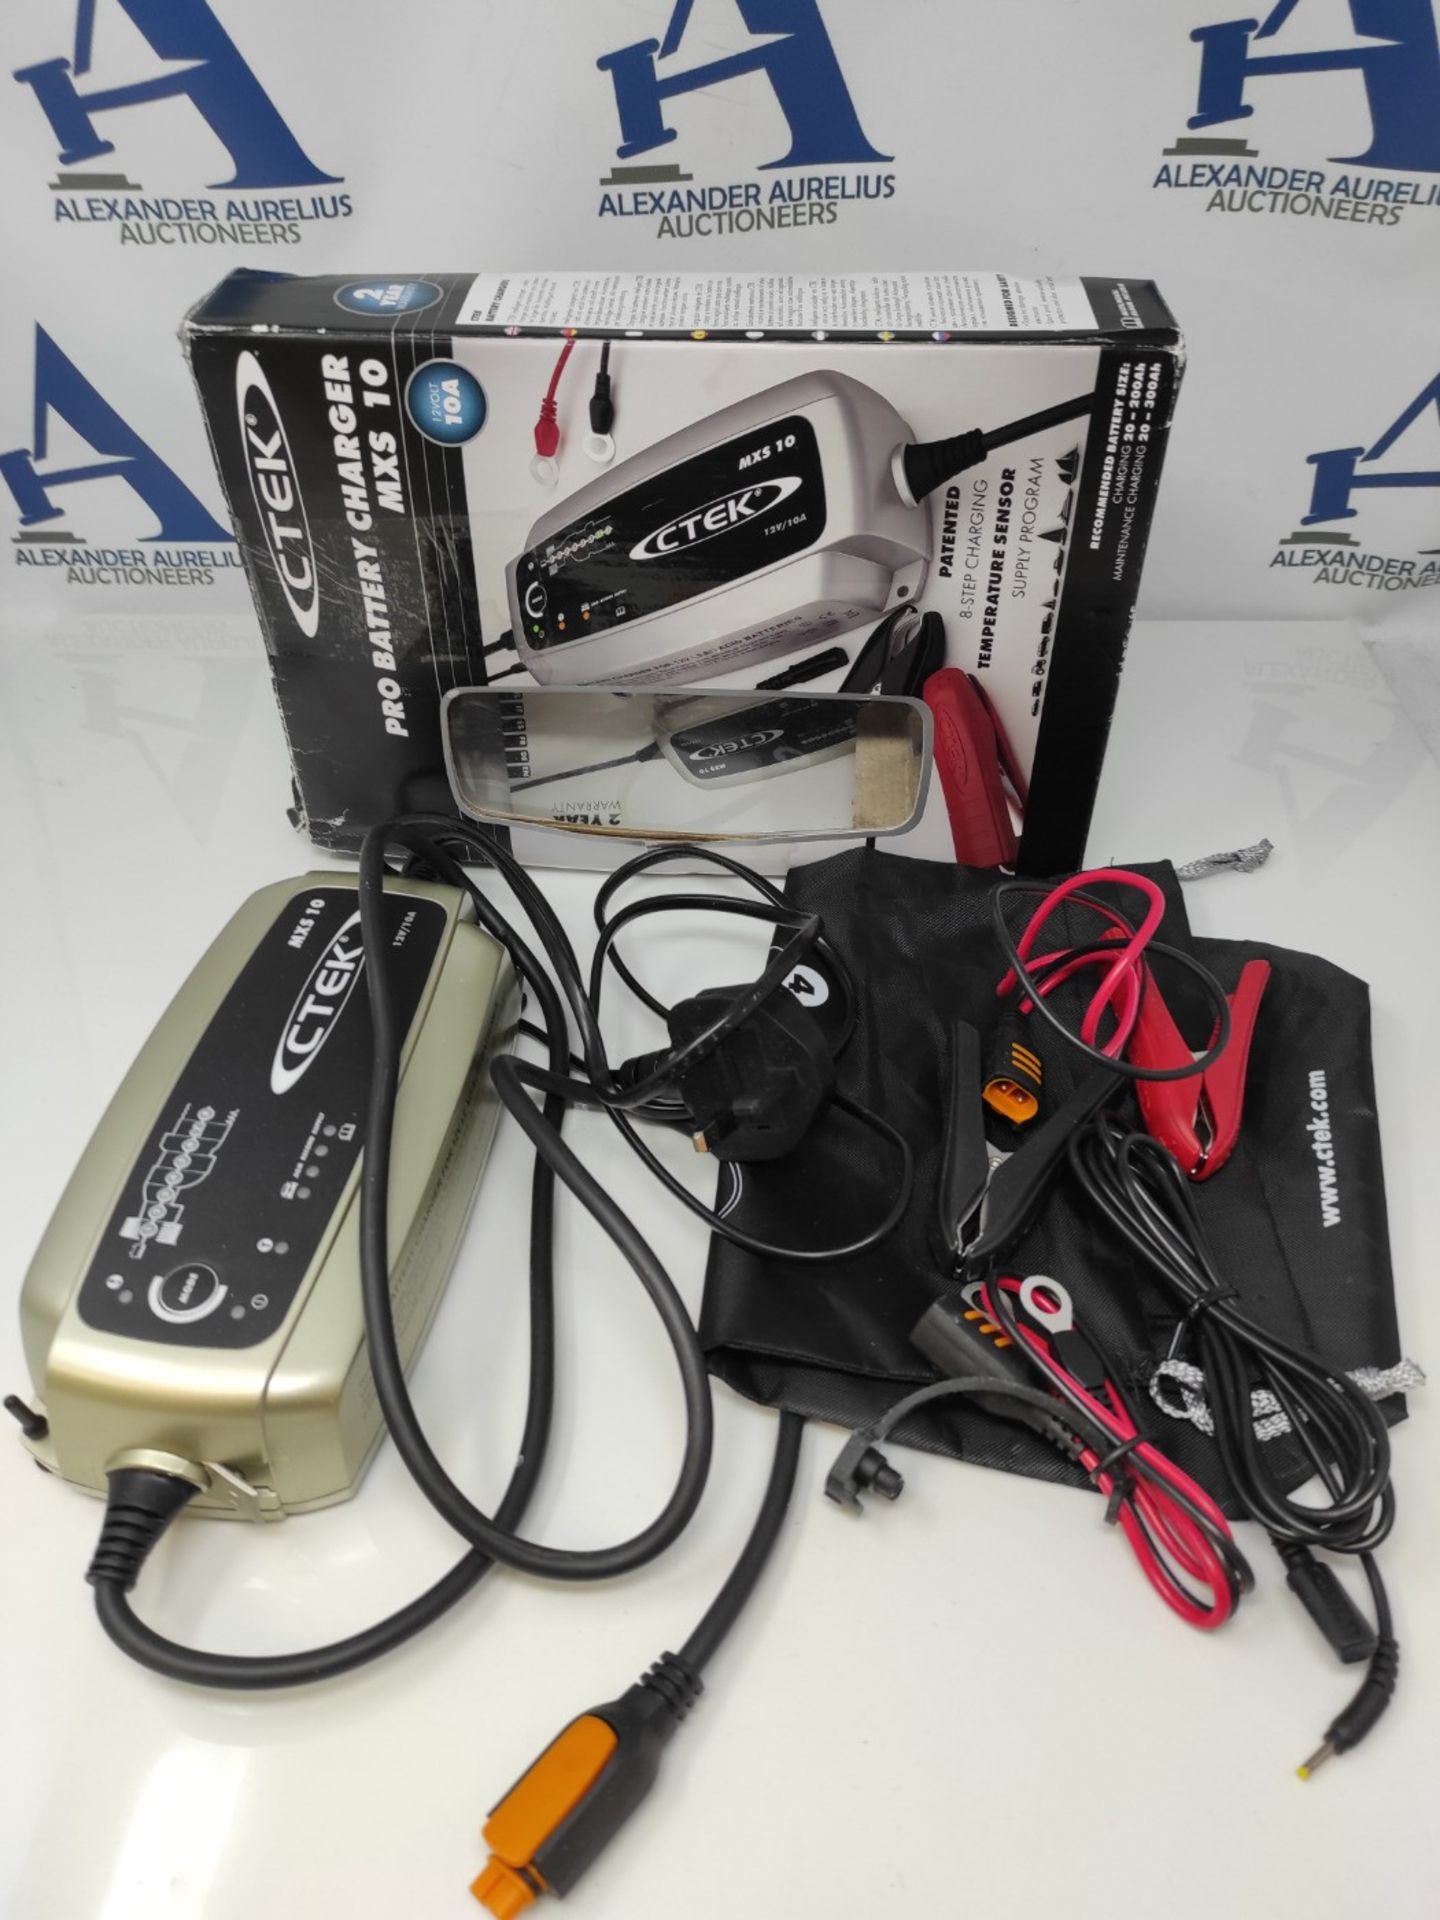 RRP £139.00 CTEK Multi MXS 10 10A 12V 8-Stage Battery Charger Conditioner - Image 2 of 2